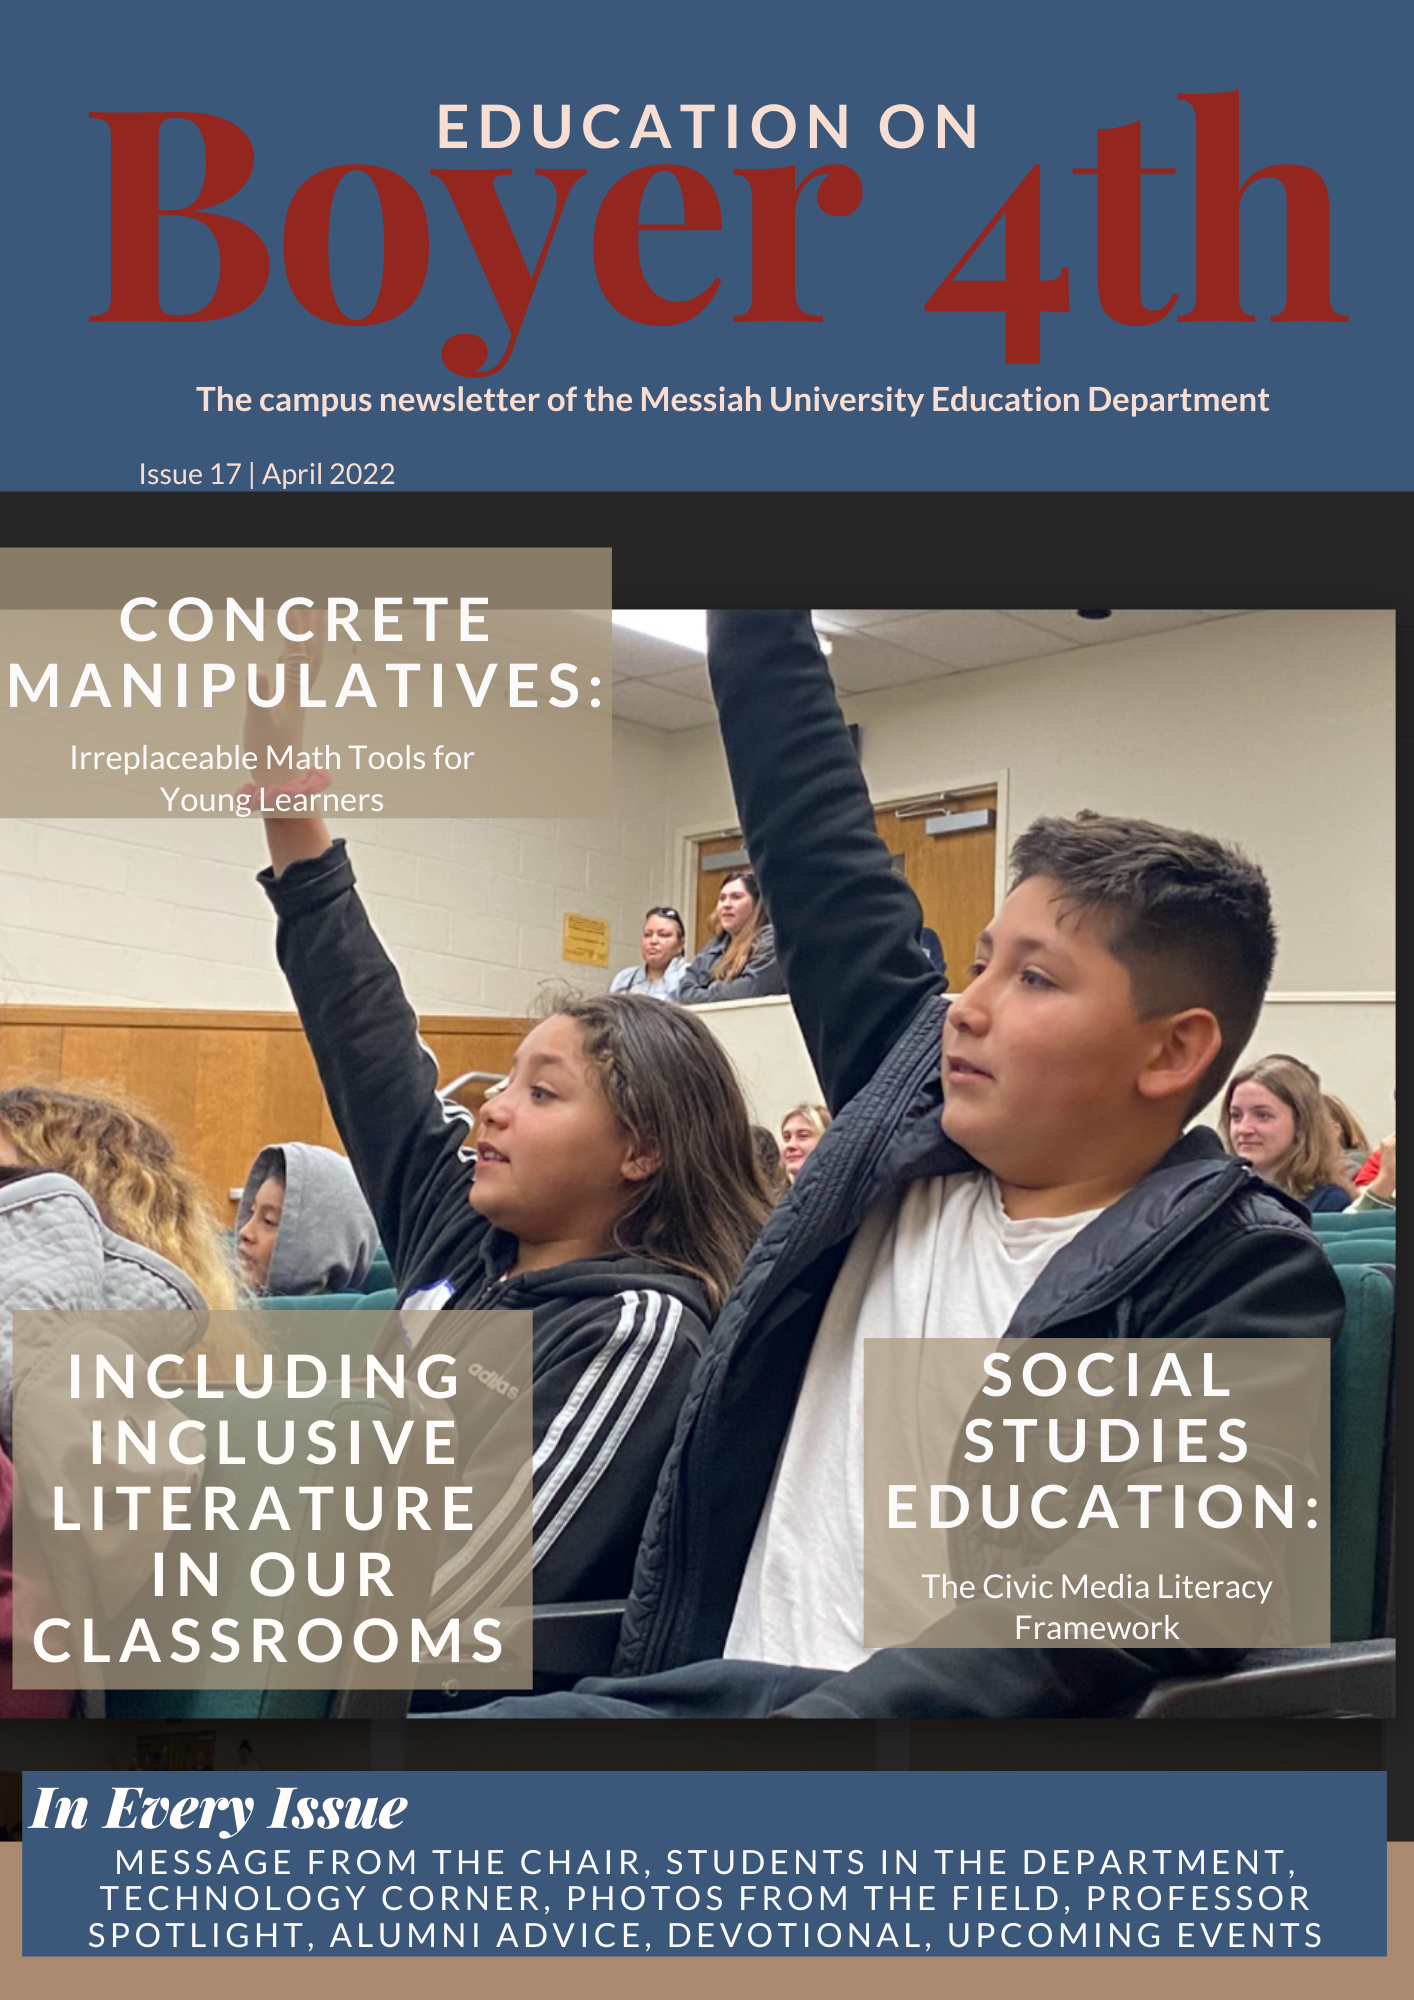 a young boy and girl wearing jackets raise their hands in a classroom on the cover of the newsletter